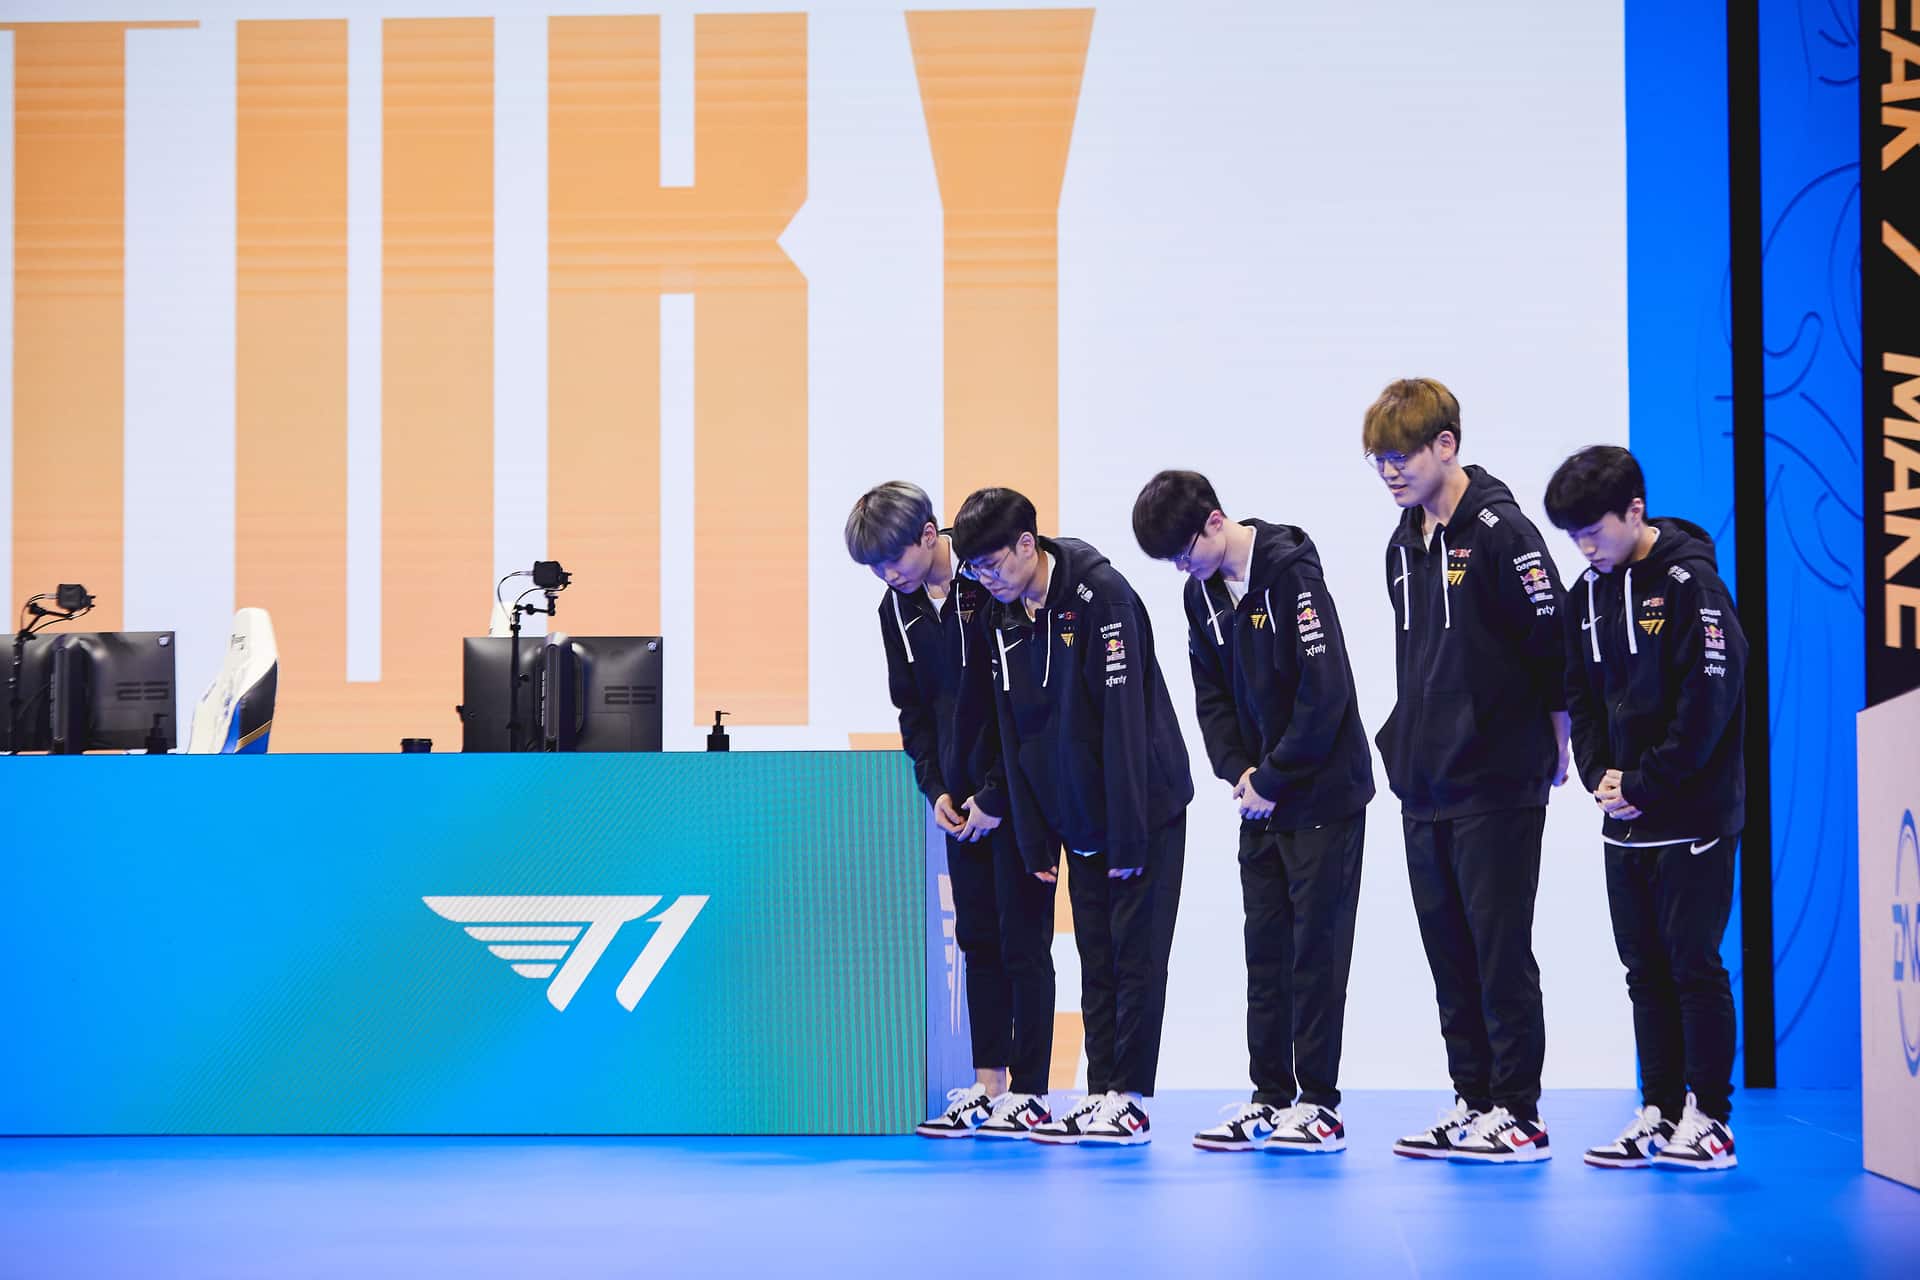 T1 bowing on stage at Worlds 2021